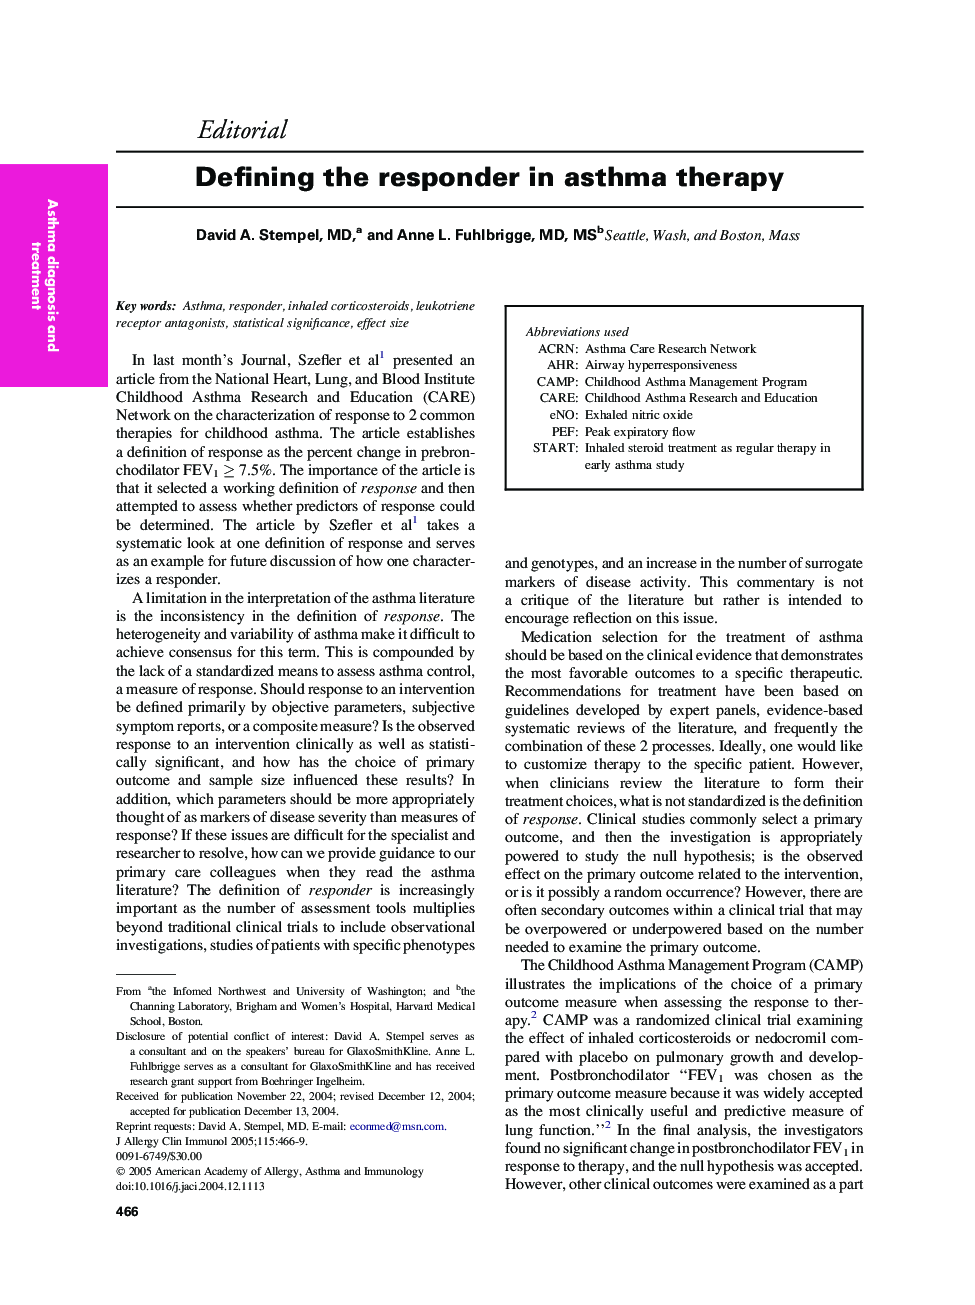 Defining the responder in asthma therapy